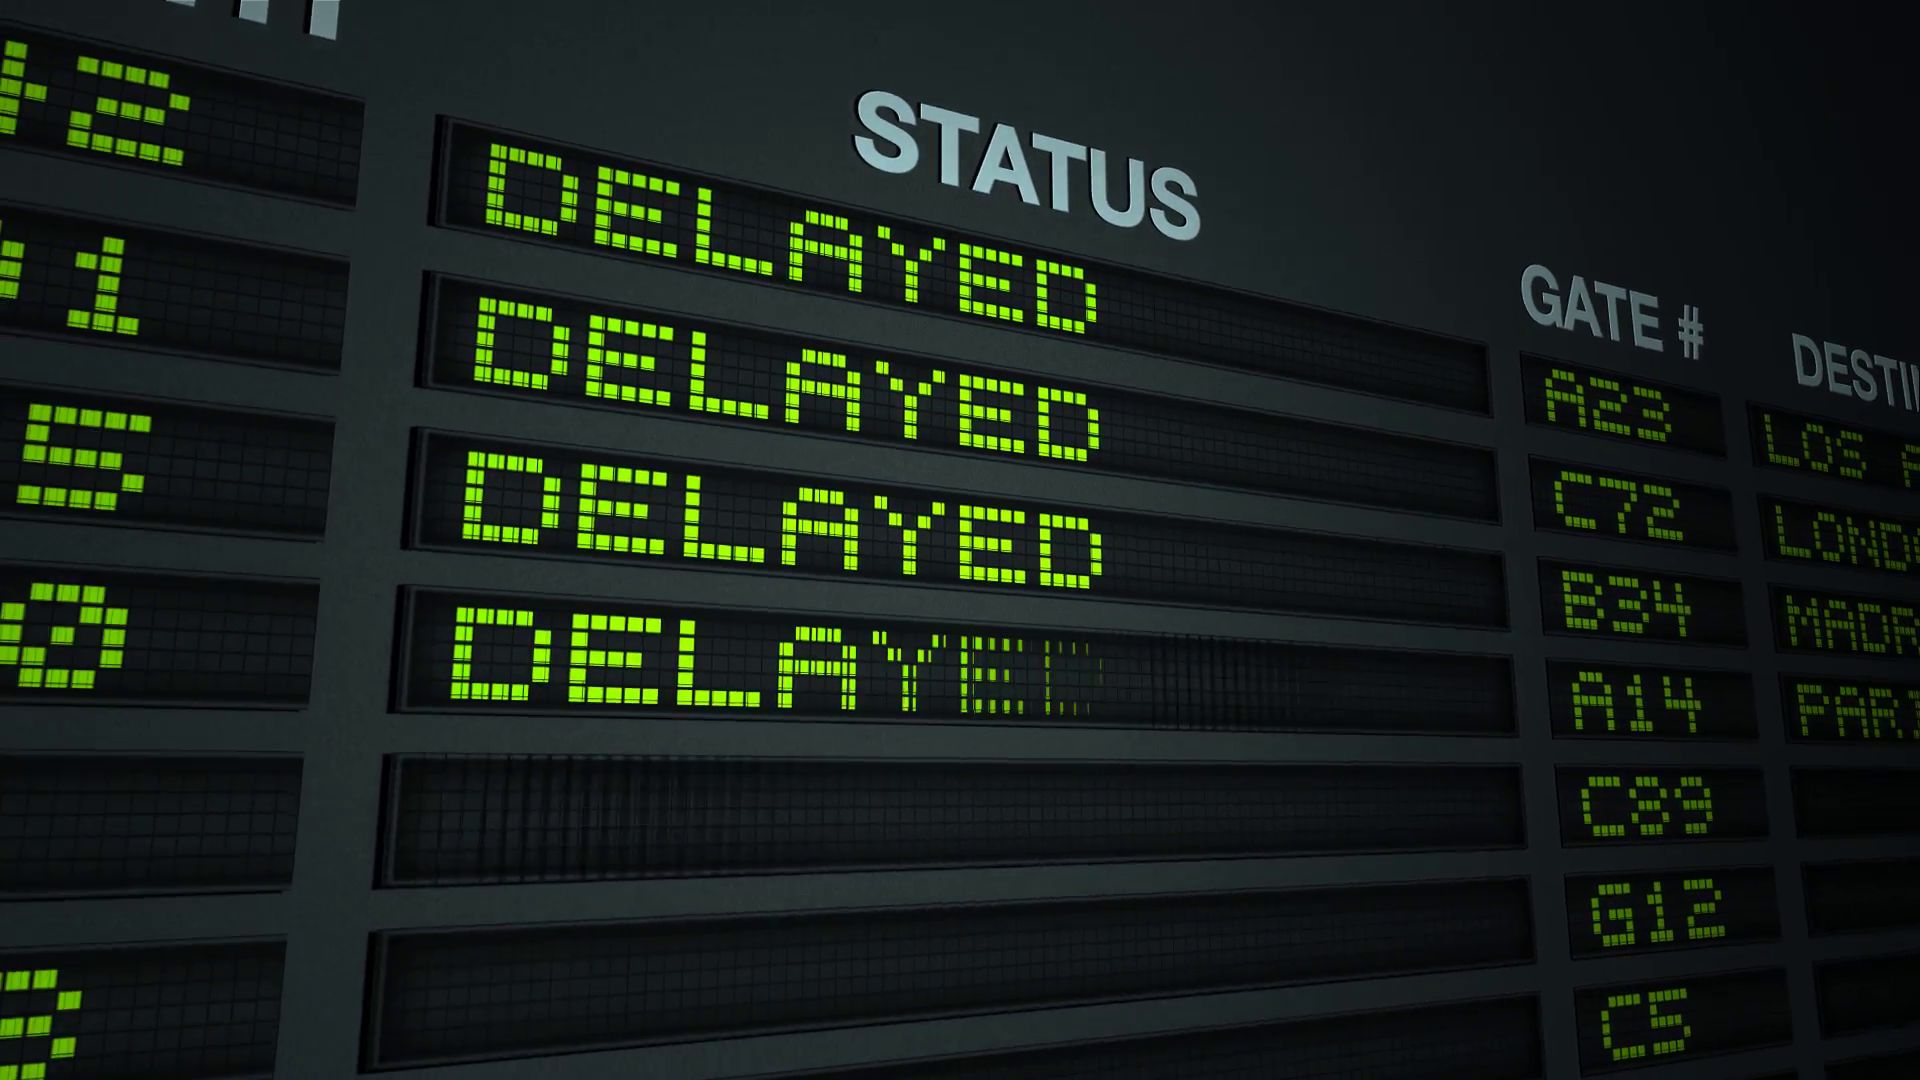 A number of flights delayed at Almaty airport